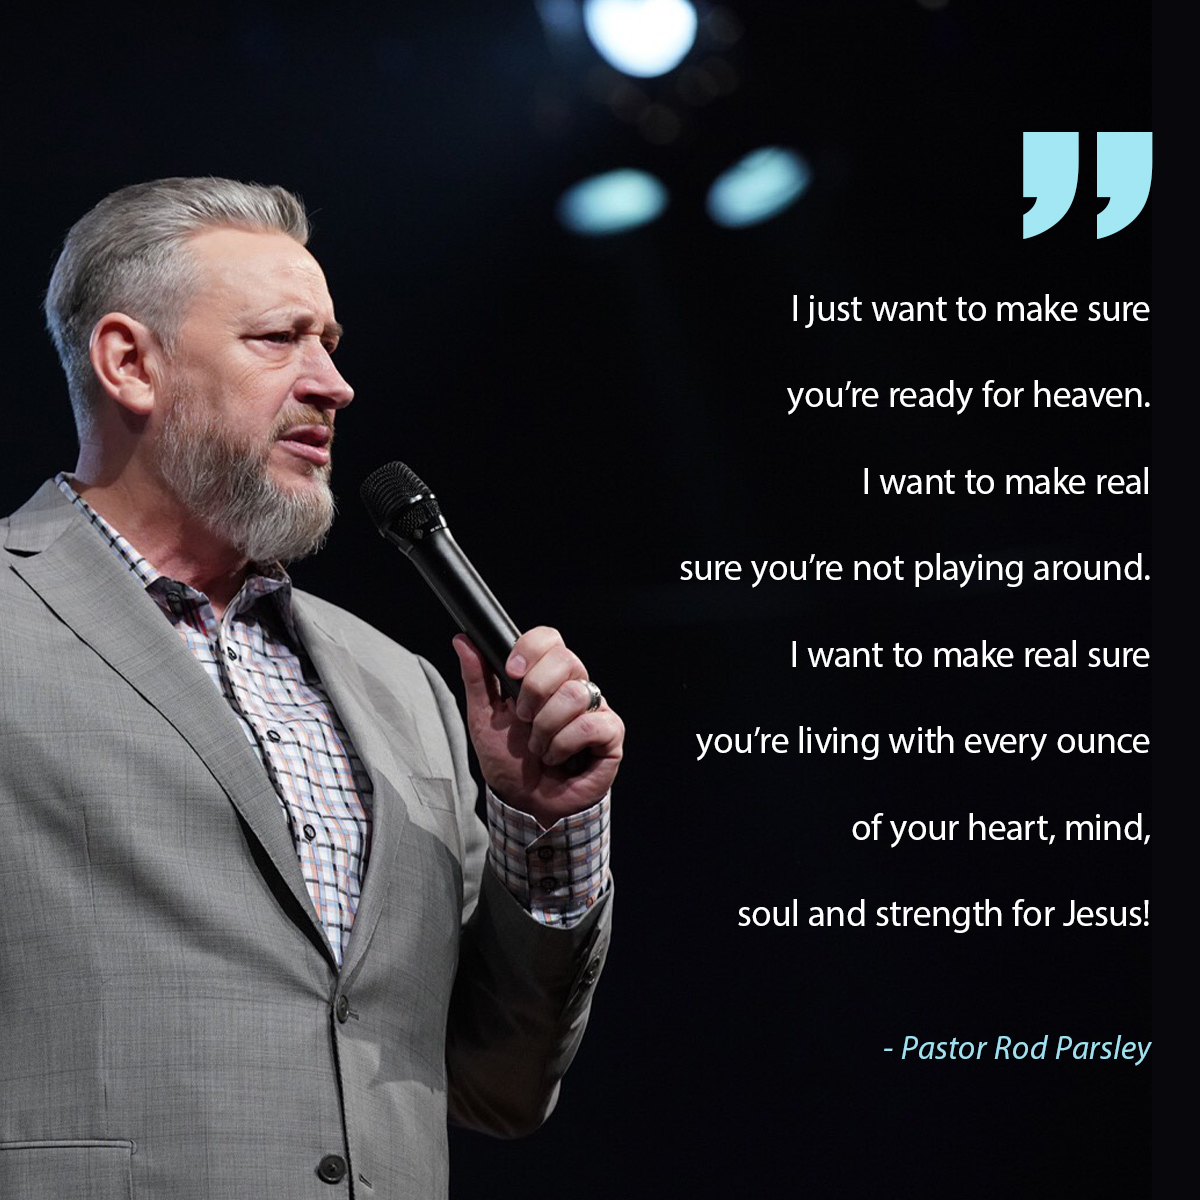 “I just want to make sure you’re ready for heaven. I want to make real sure you’re not playing around. I want to make real sure you’re living with every ounce of your heart, mind, soul and strength for Jesus!” – Pastor Rod Parsley